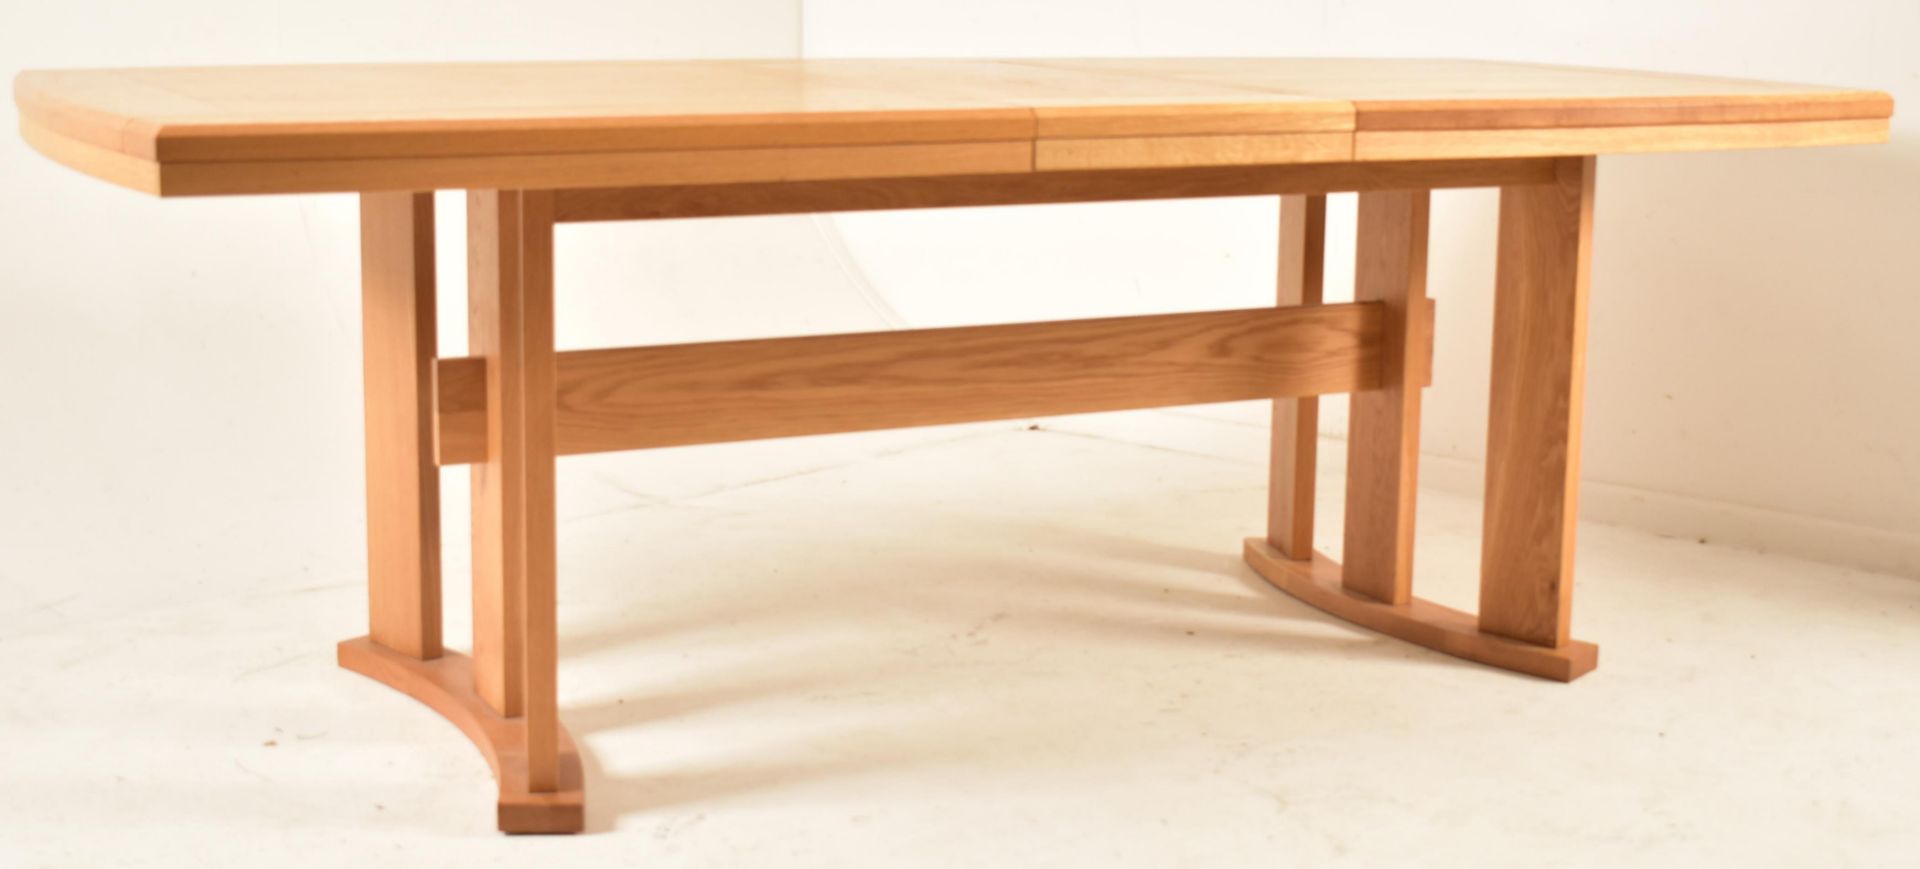 CONTEMPORARY HIGH END BRITISH DESIGN OAK DINING TABLE - Image 4 of 6